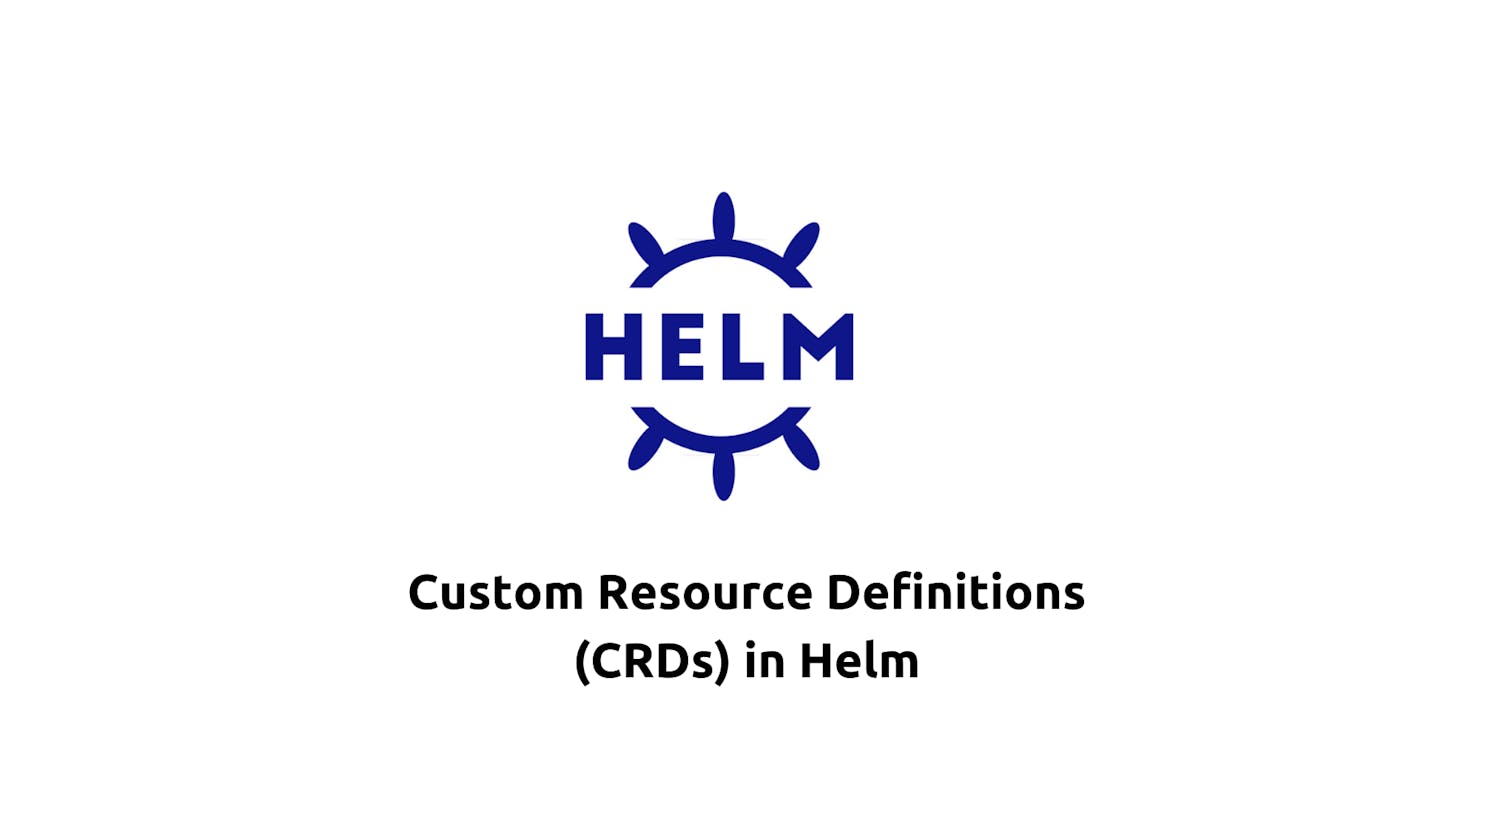 Custom Resource Definitions (CRDs) in Helm